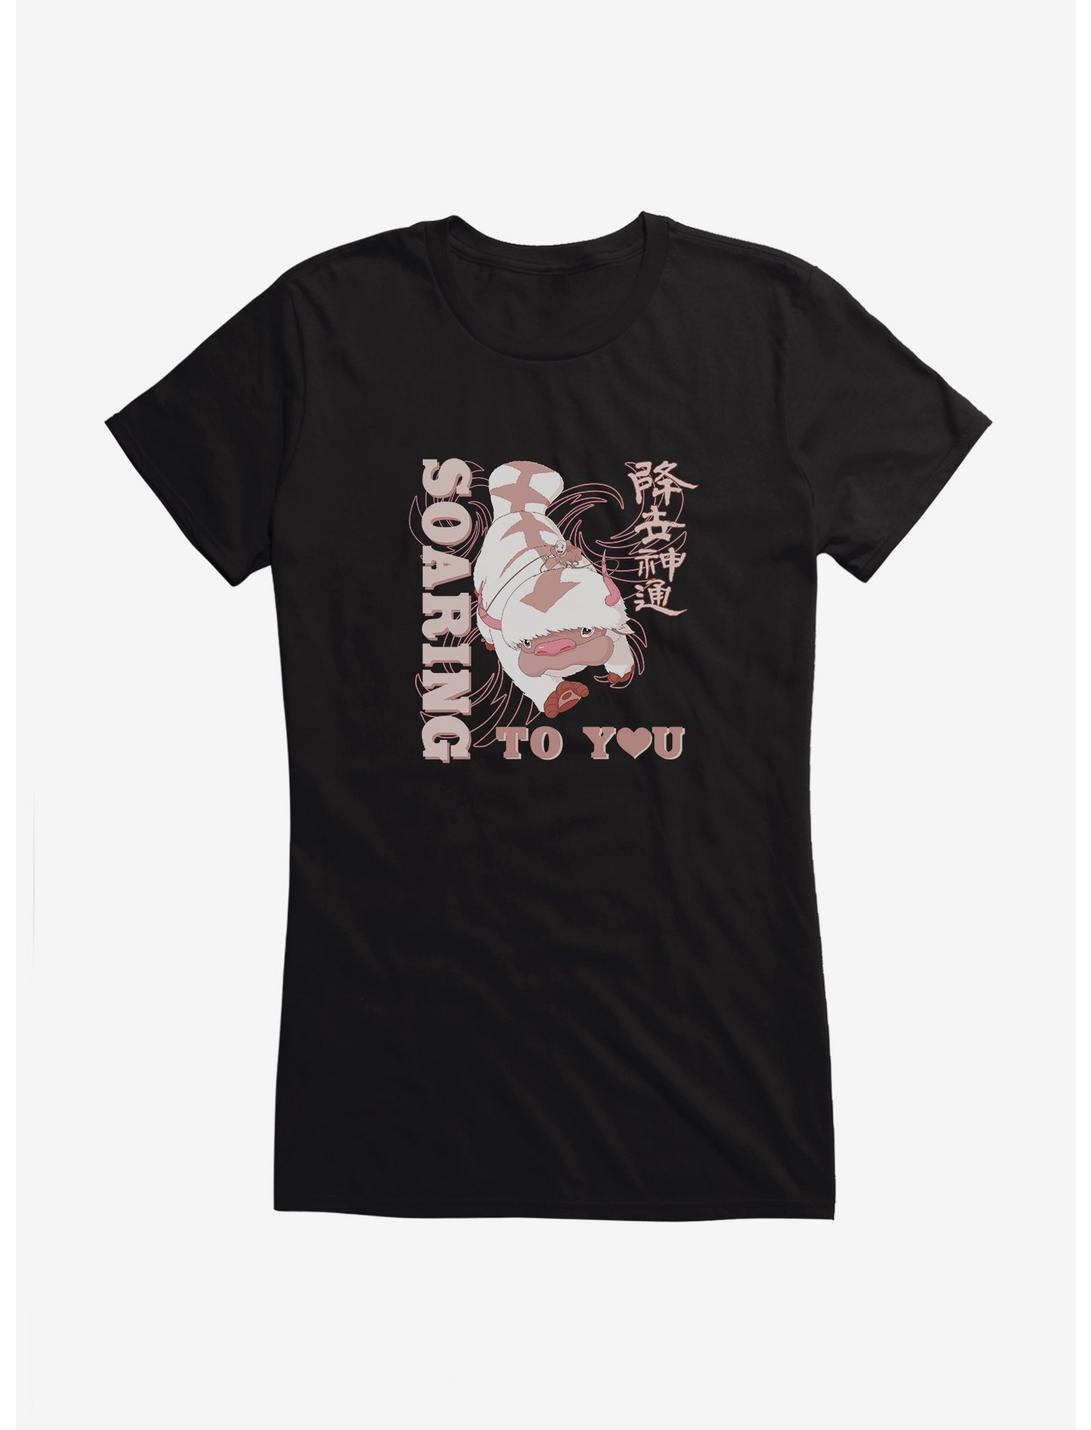 Avatar: The Last Airbender Soaring To You Girls T-Shirt, , hi-res